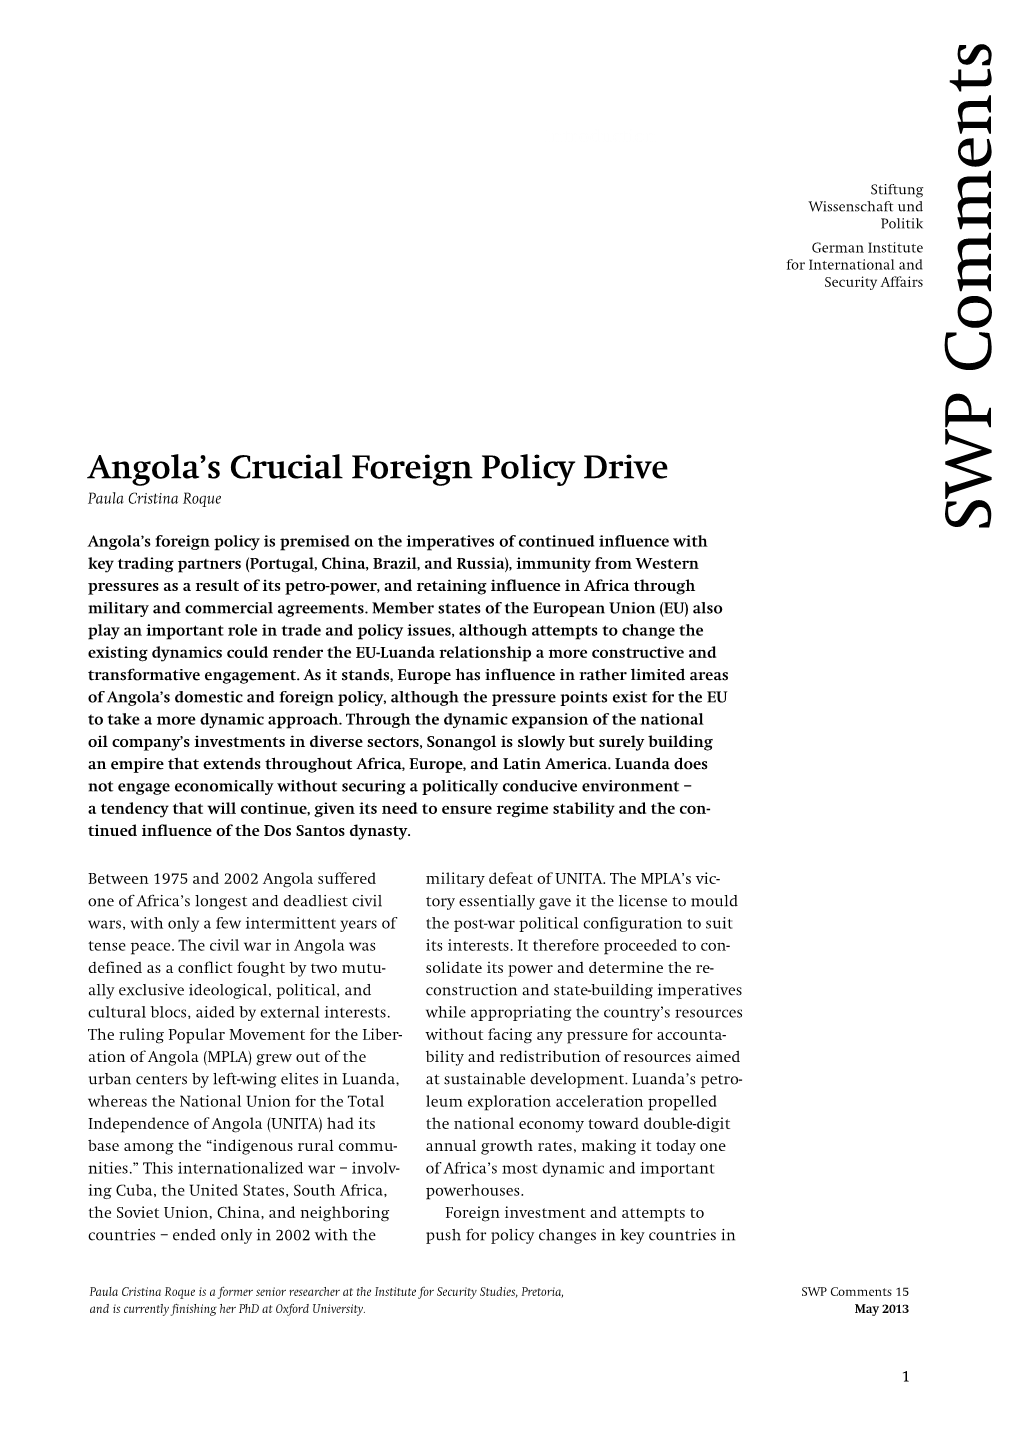 Angola's Crucial Foreign Policy Drive